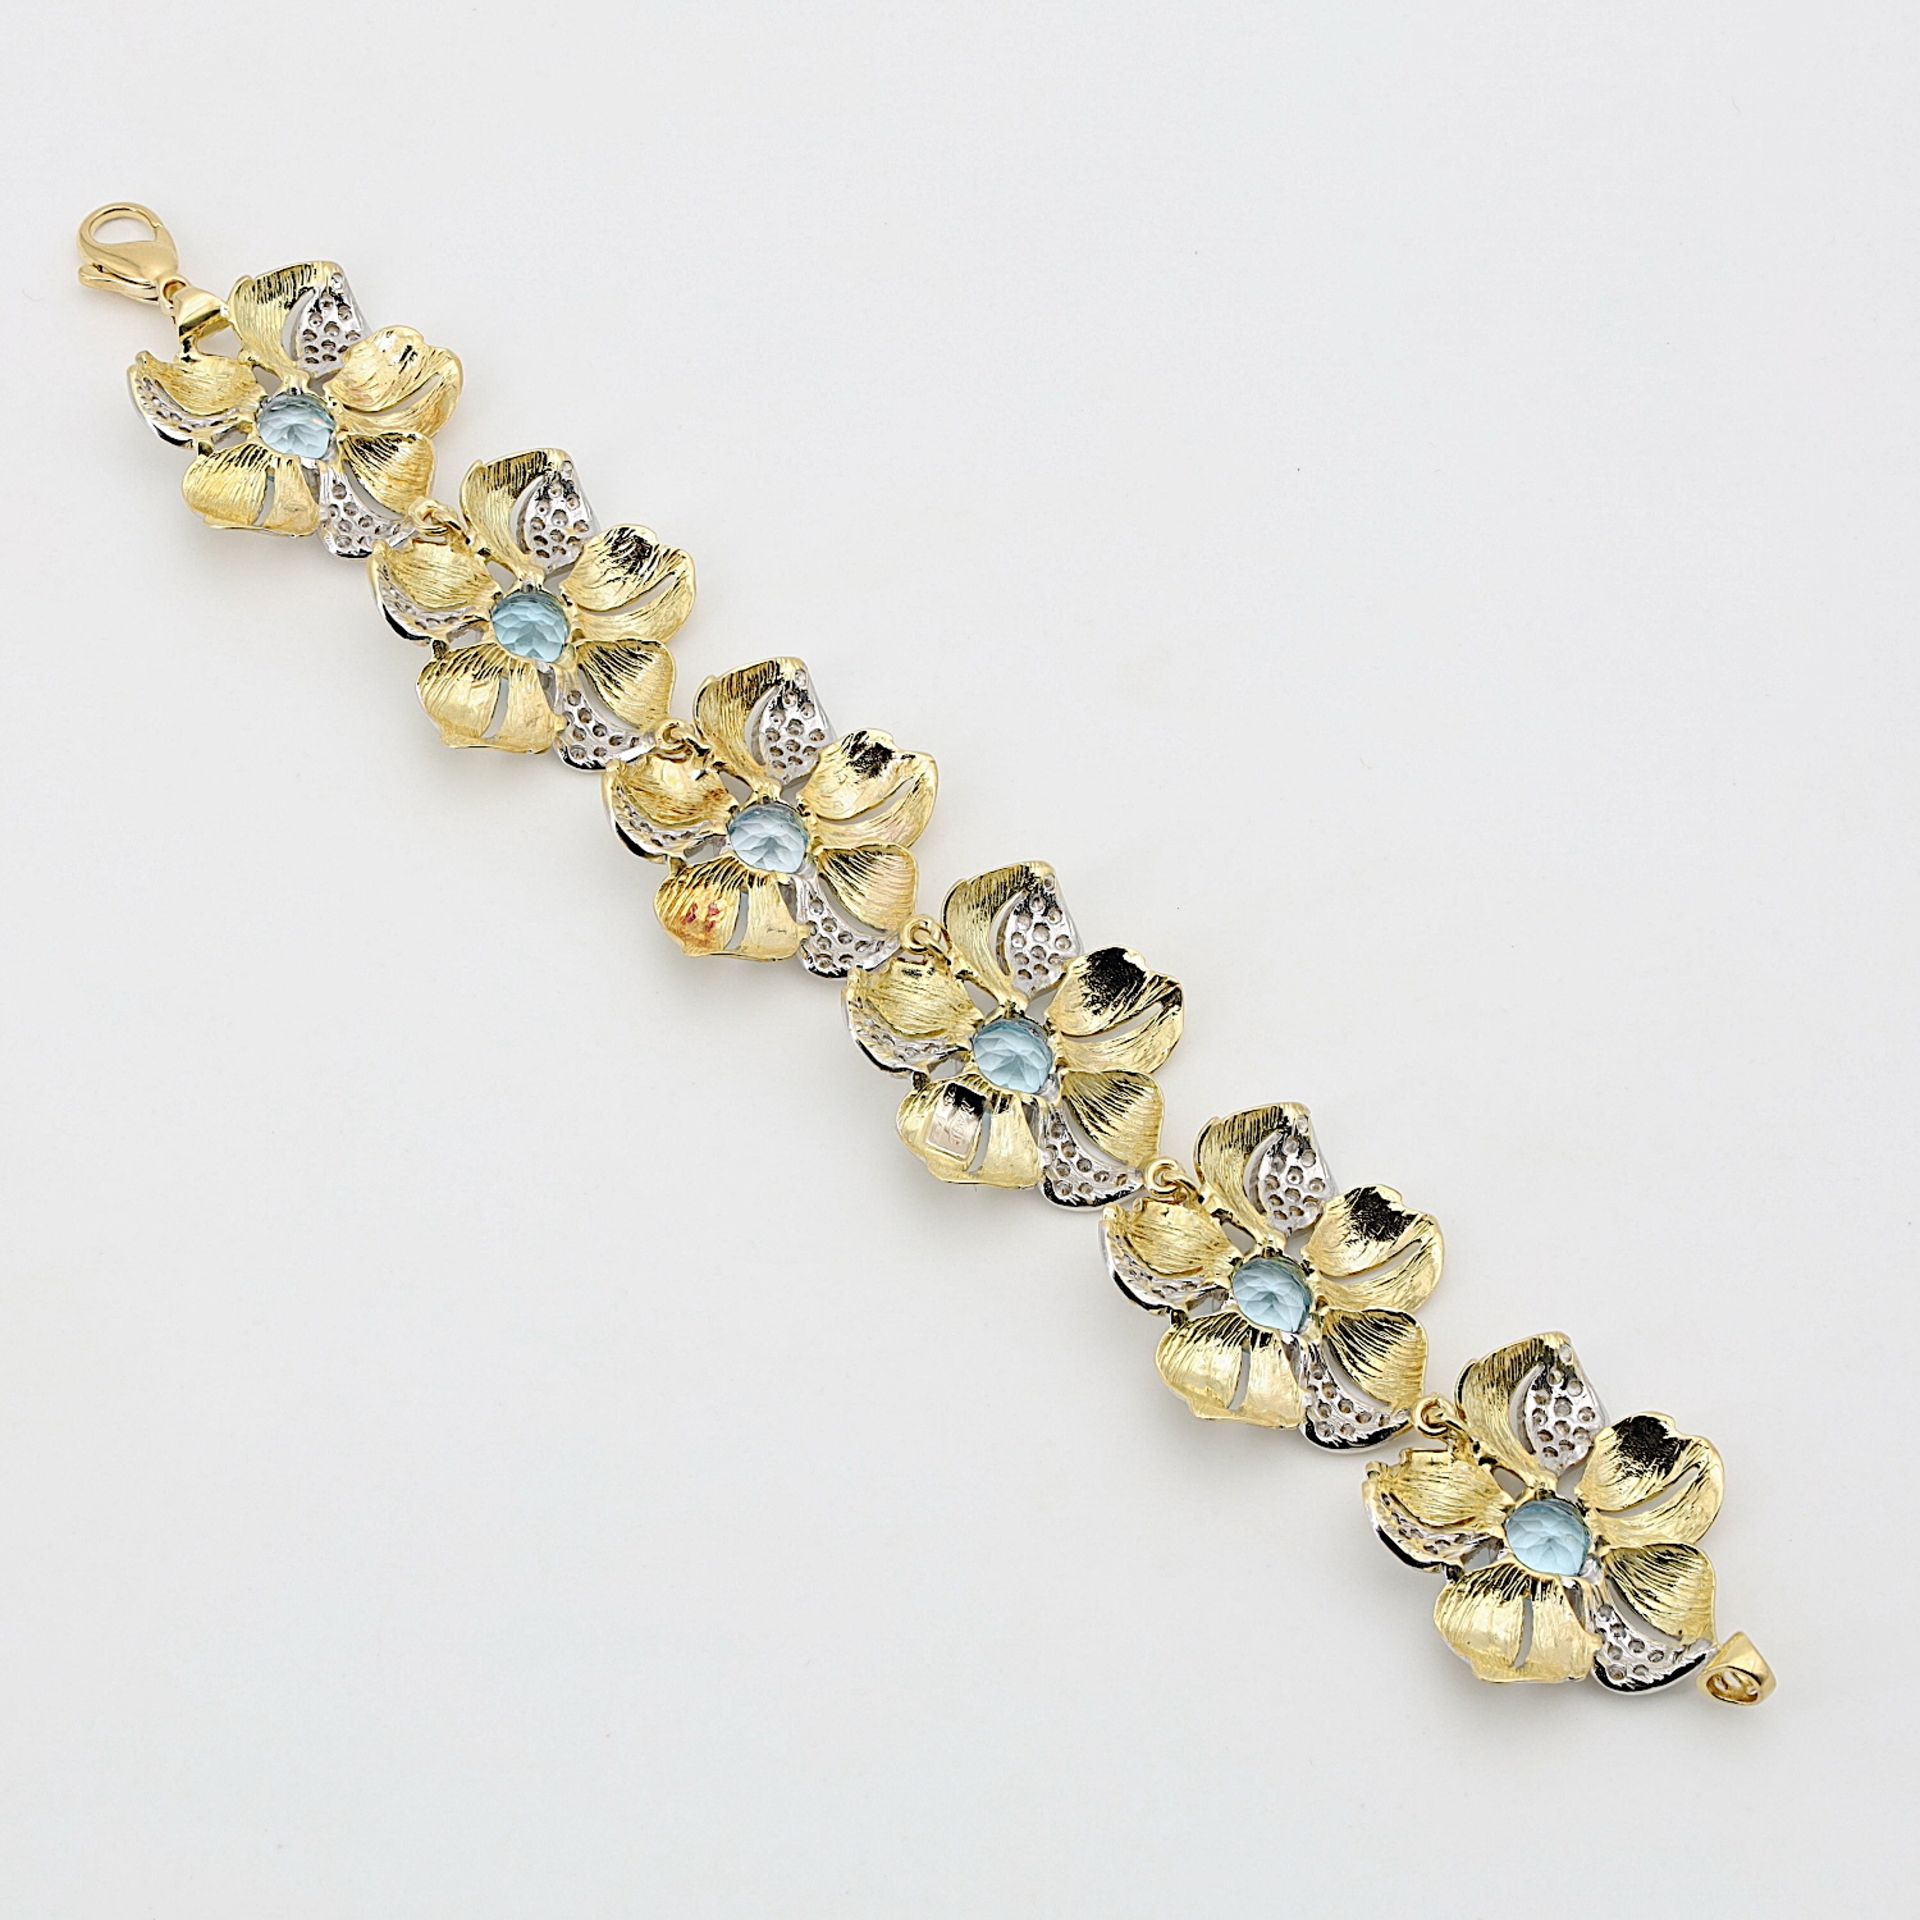 Bracelet, 750 gold with topazes and cubic zirconias - Image 4 of 4